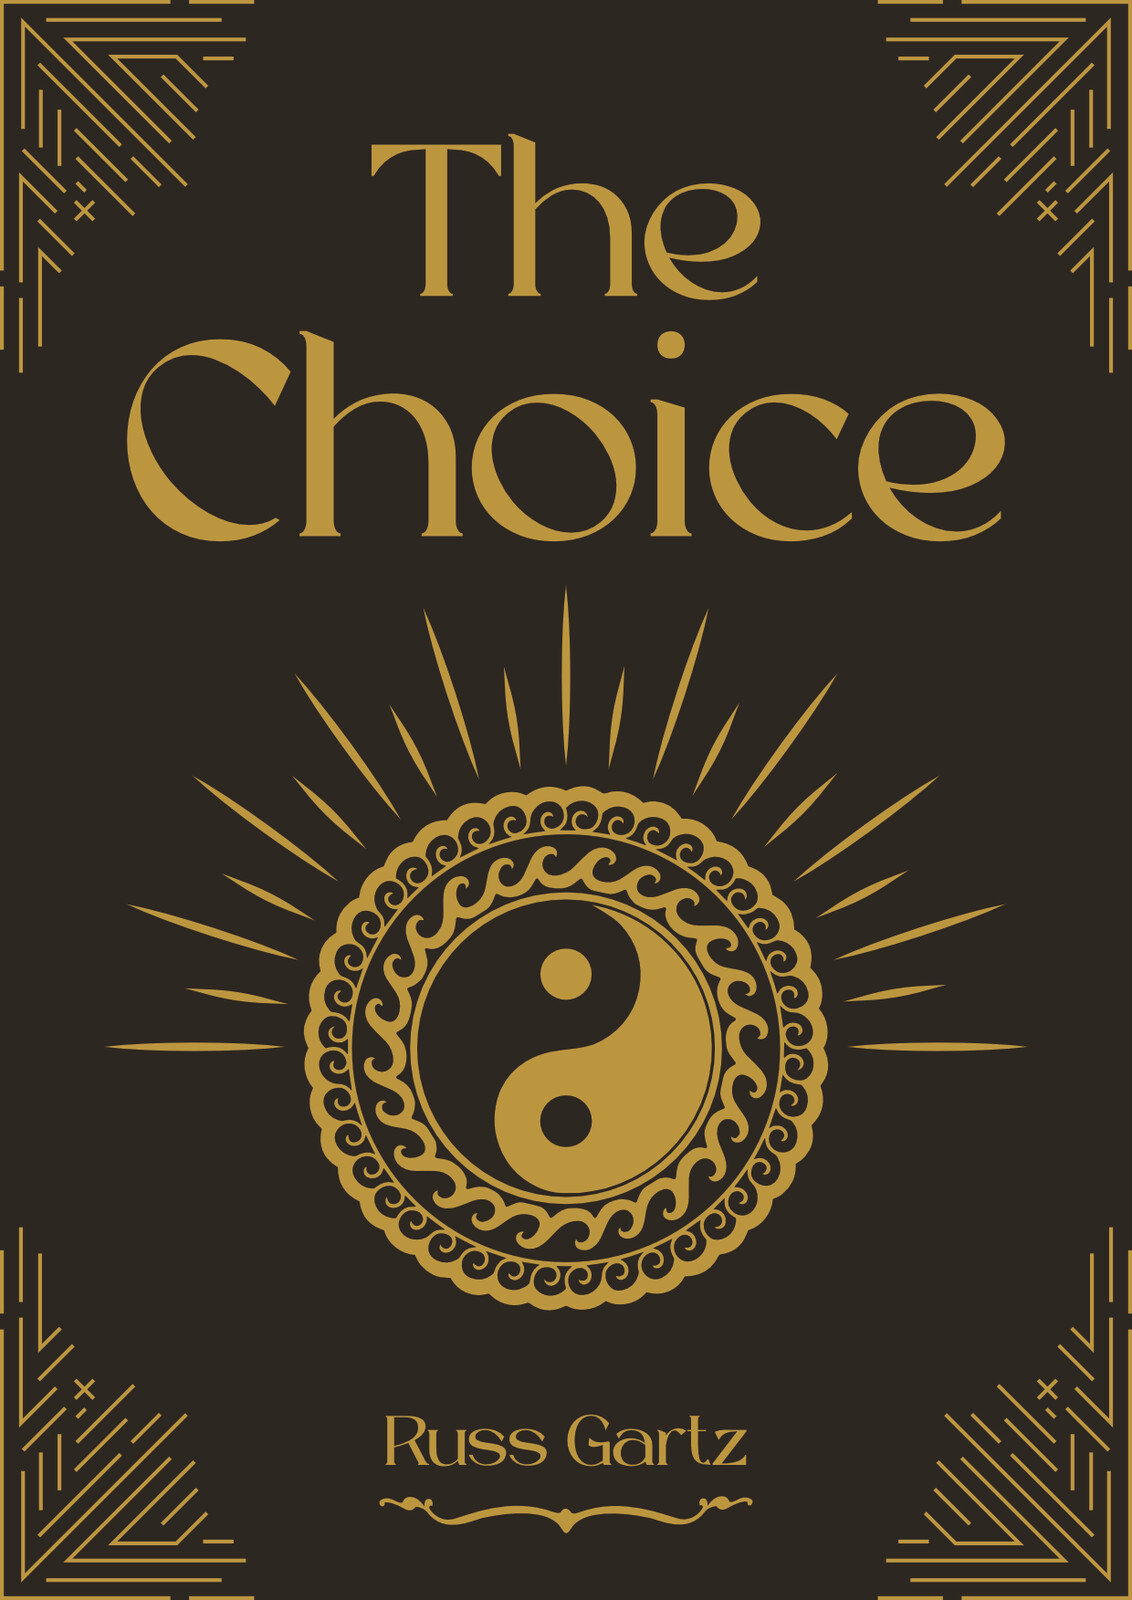 Alternate design choice for The Choice book cover.